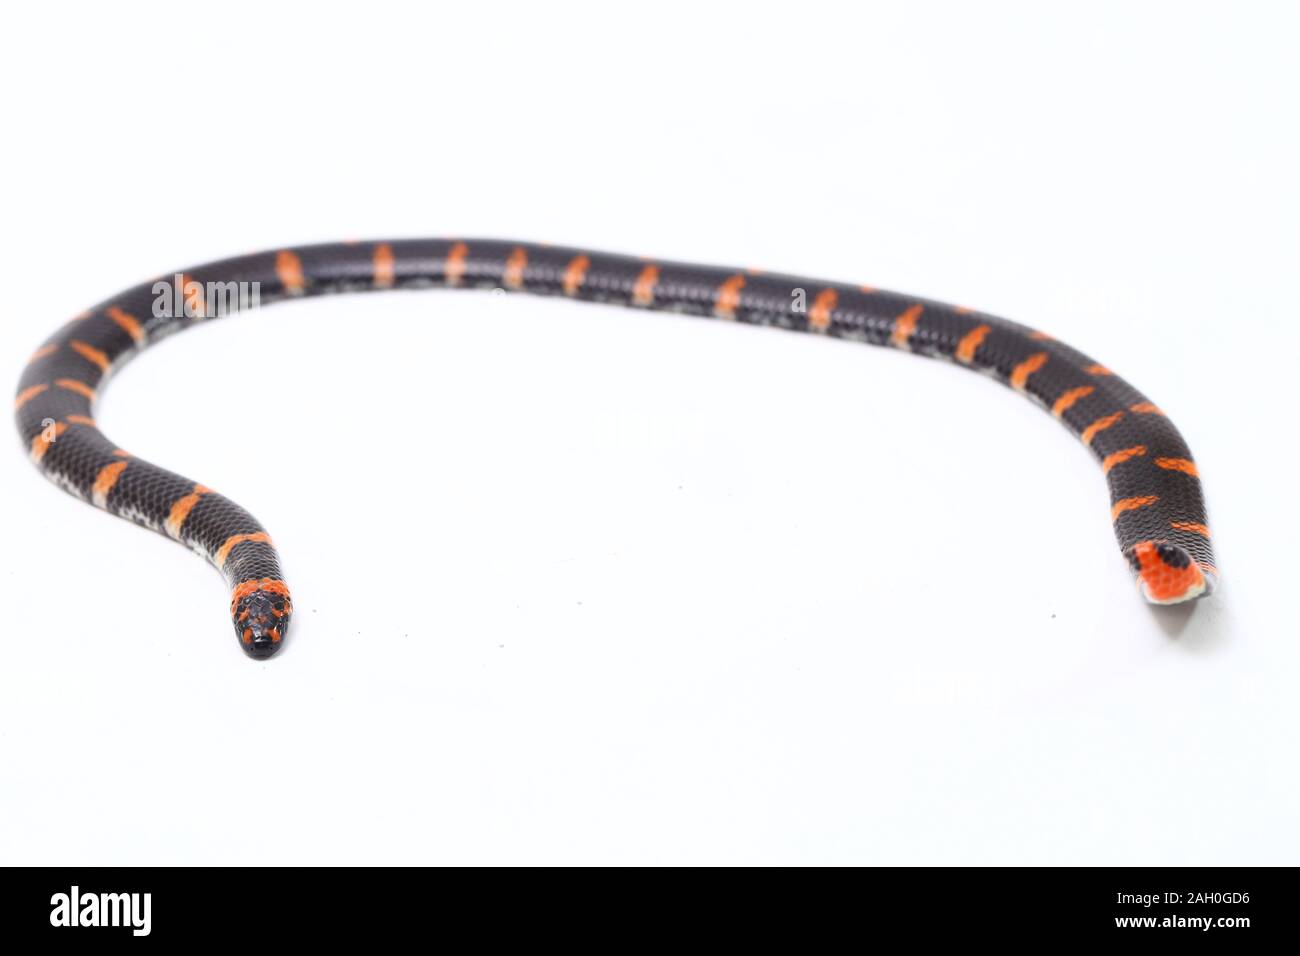 https://c8.alamy.com/comp/2AH0GD6/red-tailed-pipe-snake-scientific-name-cylindrophis-ruffus-isolate-on-white-background-2AH0GD6.jpg